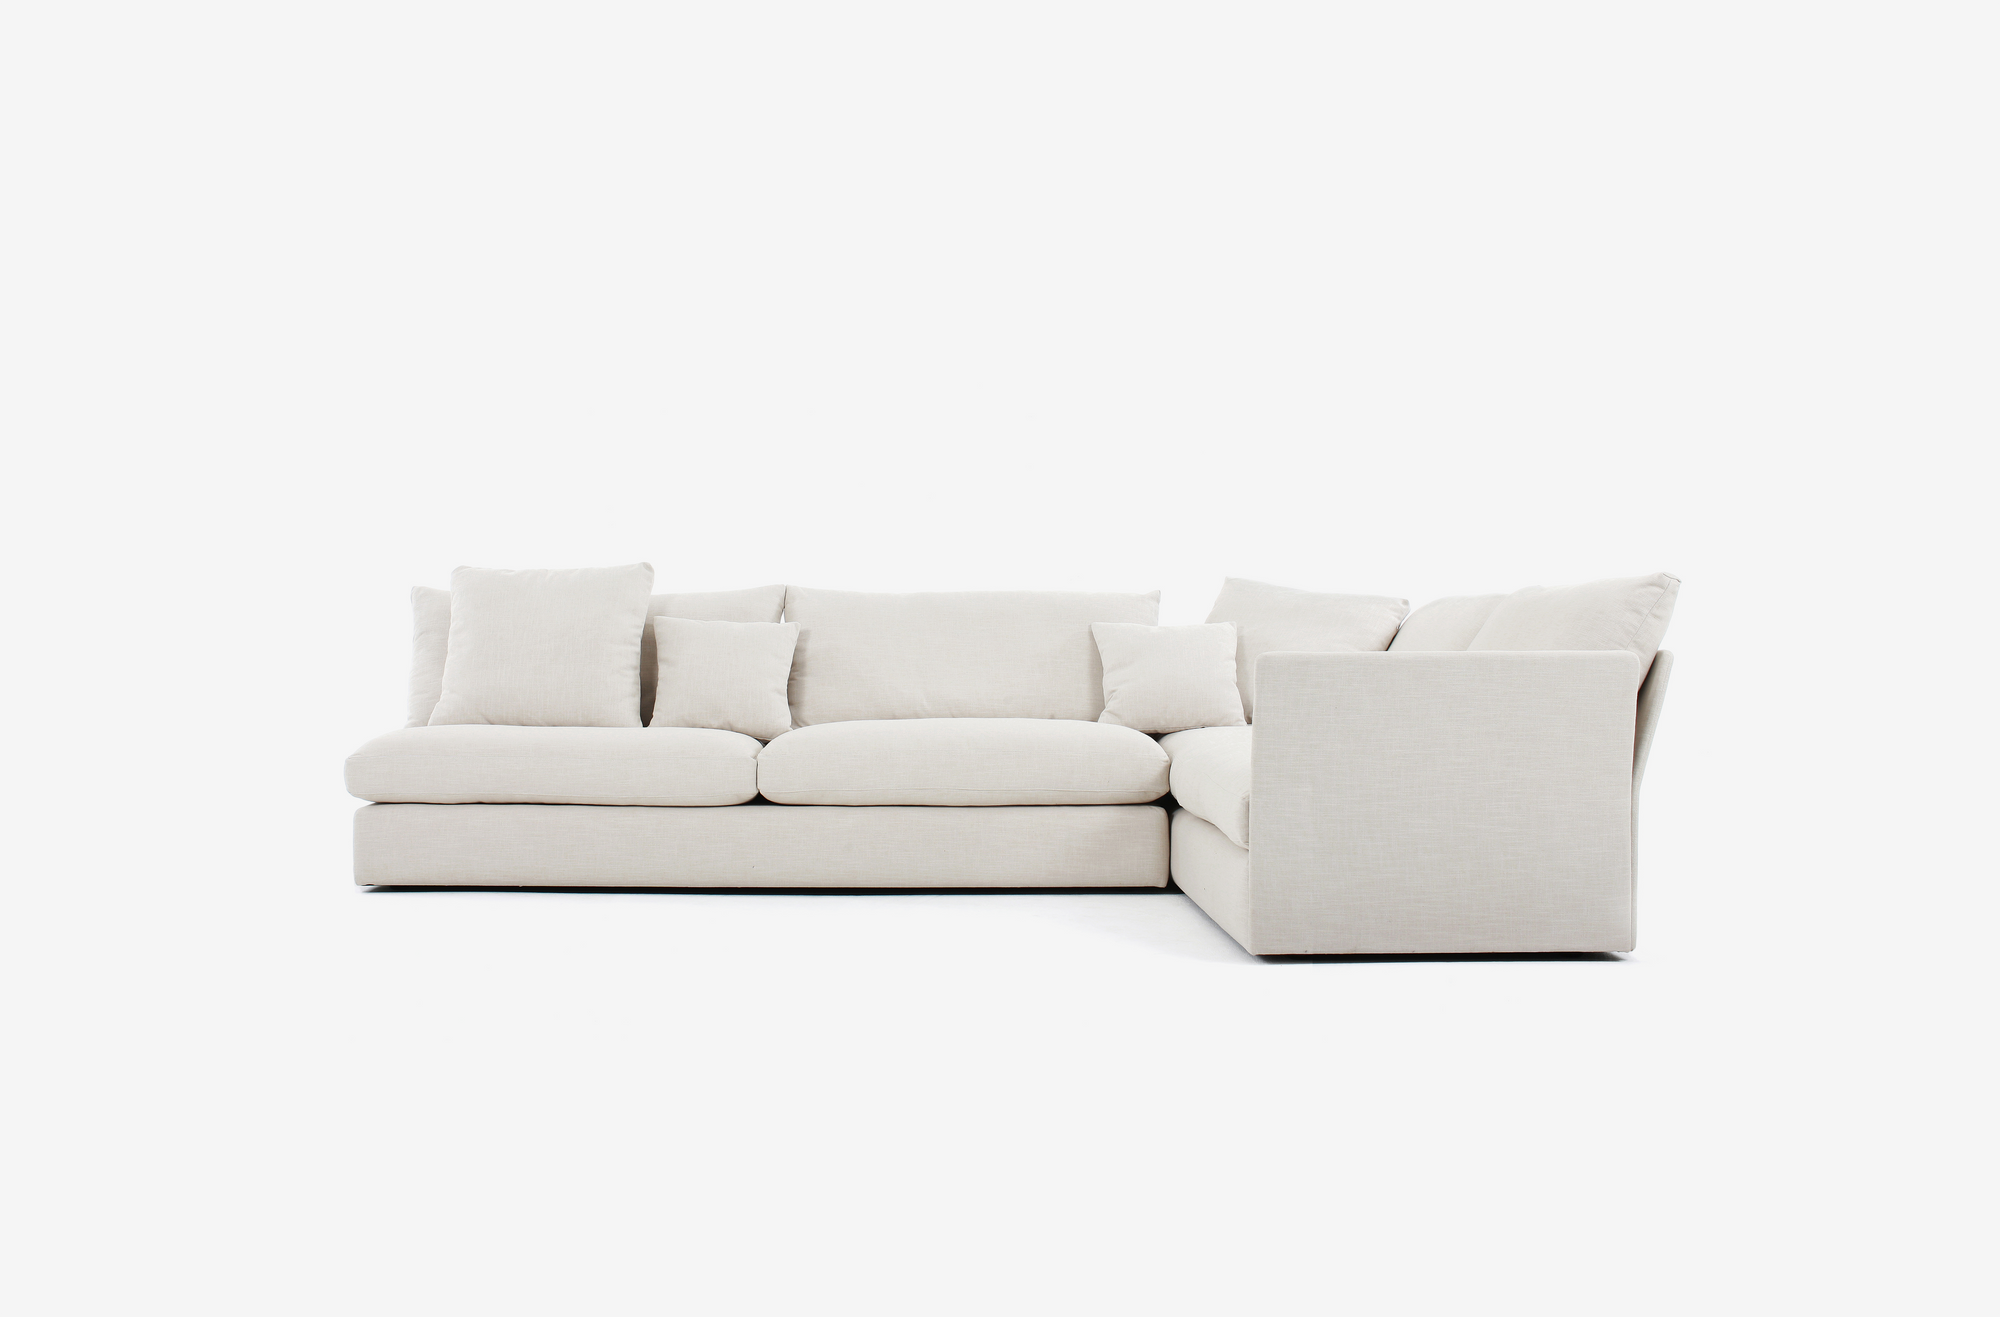 Outline Sofa - 3 Seater